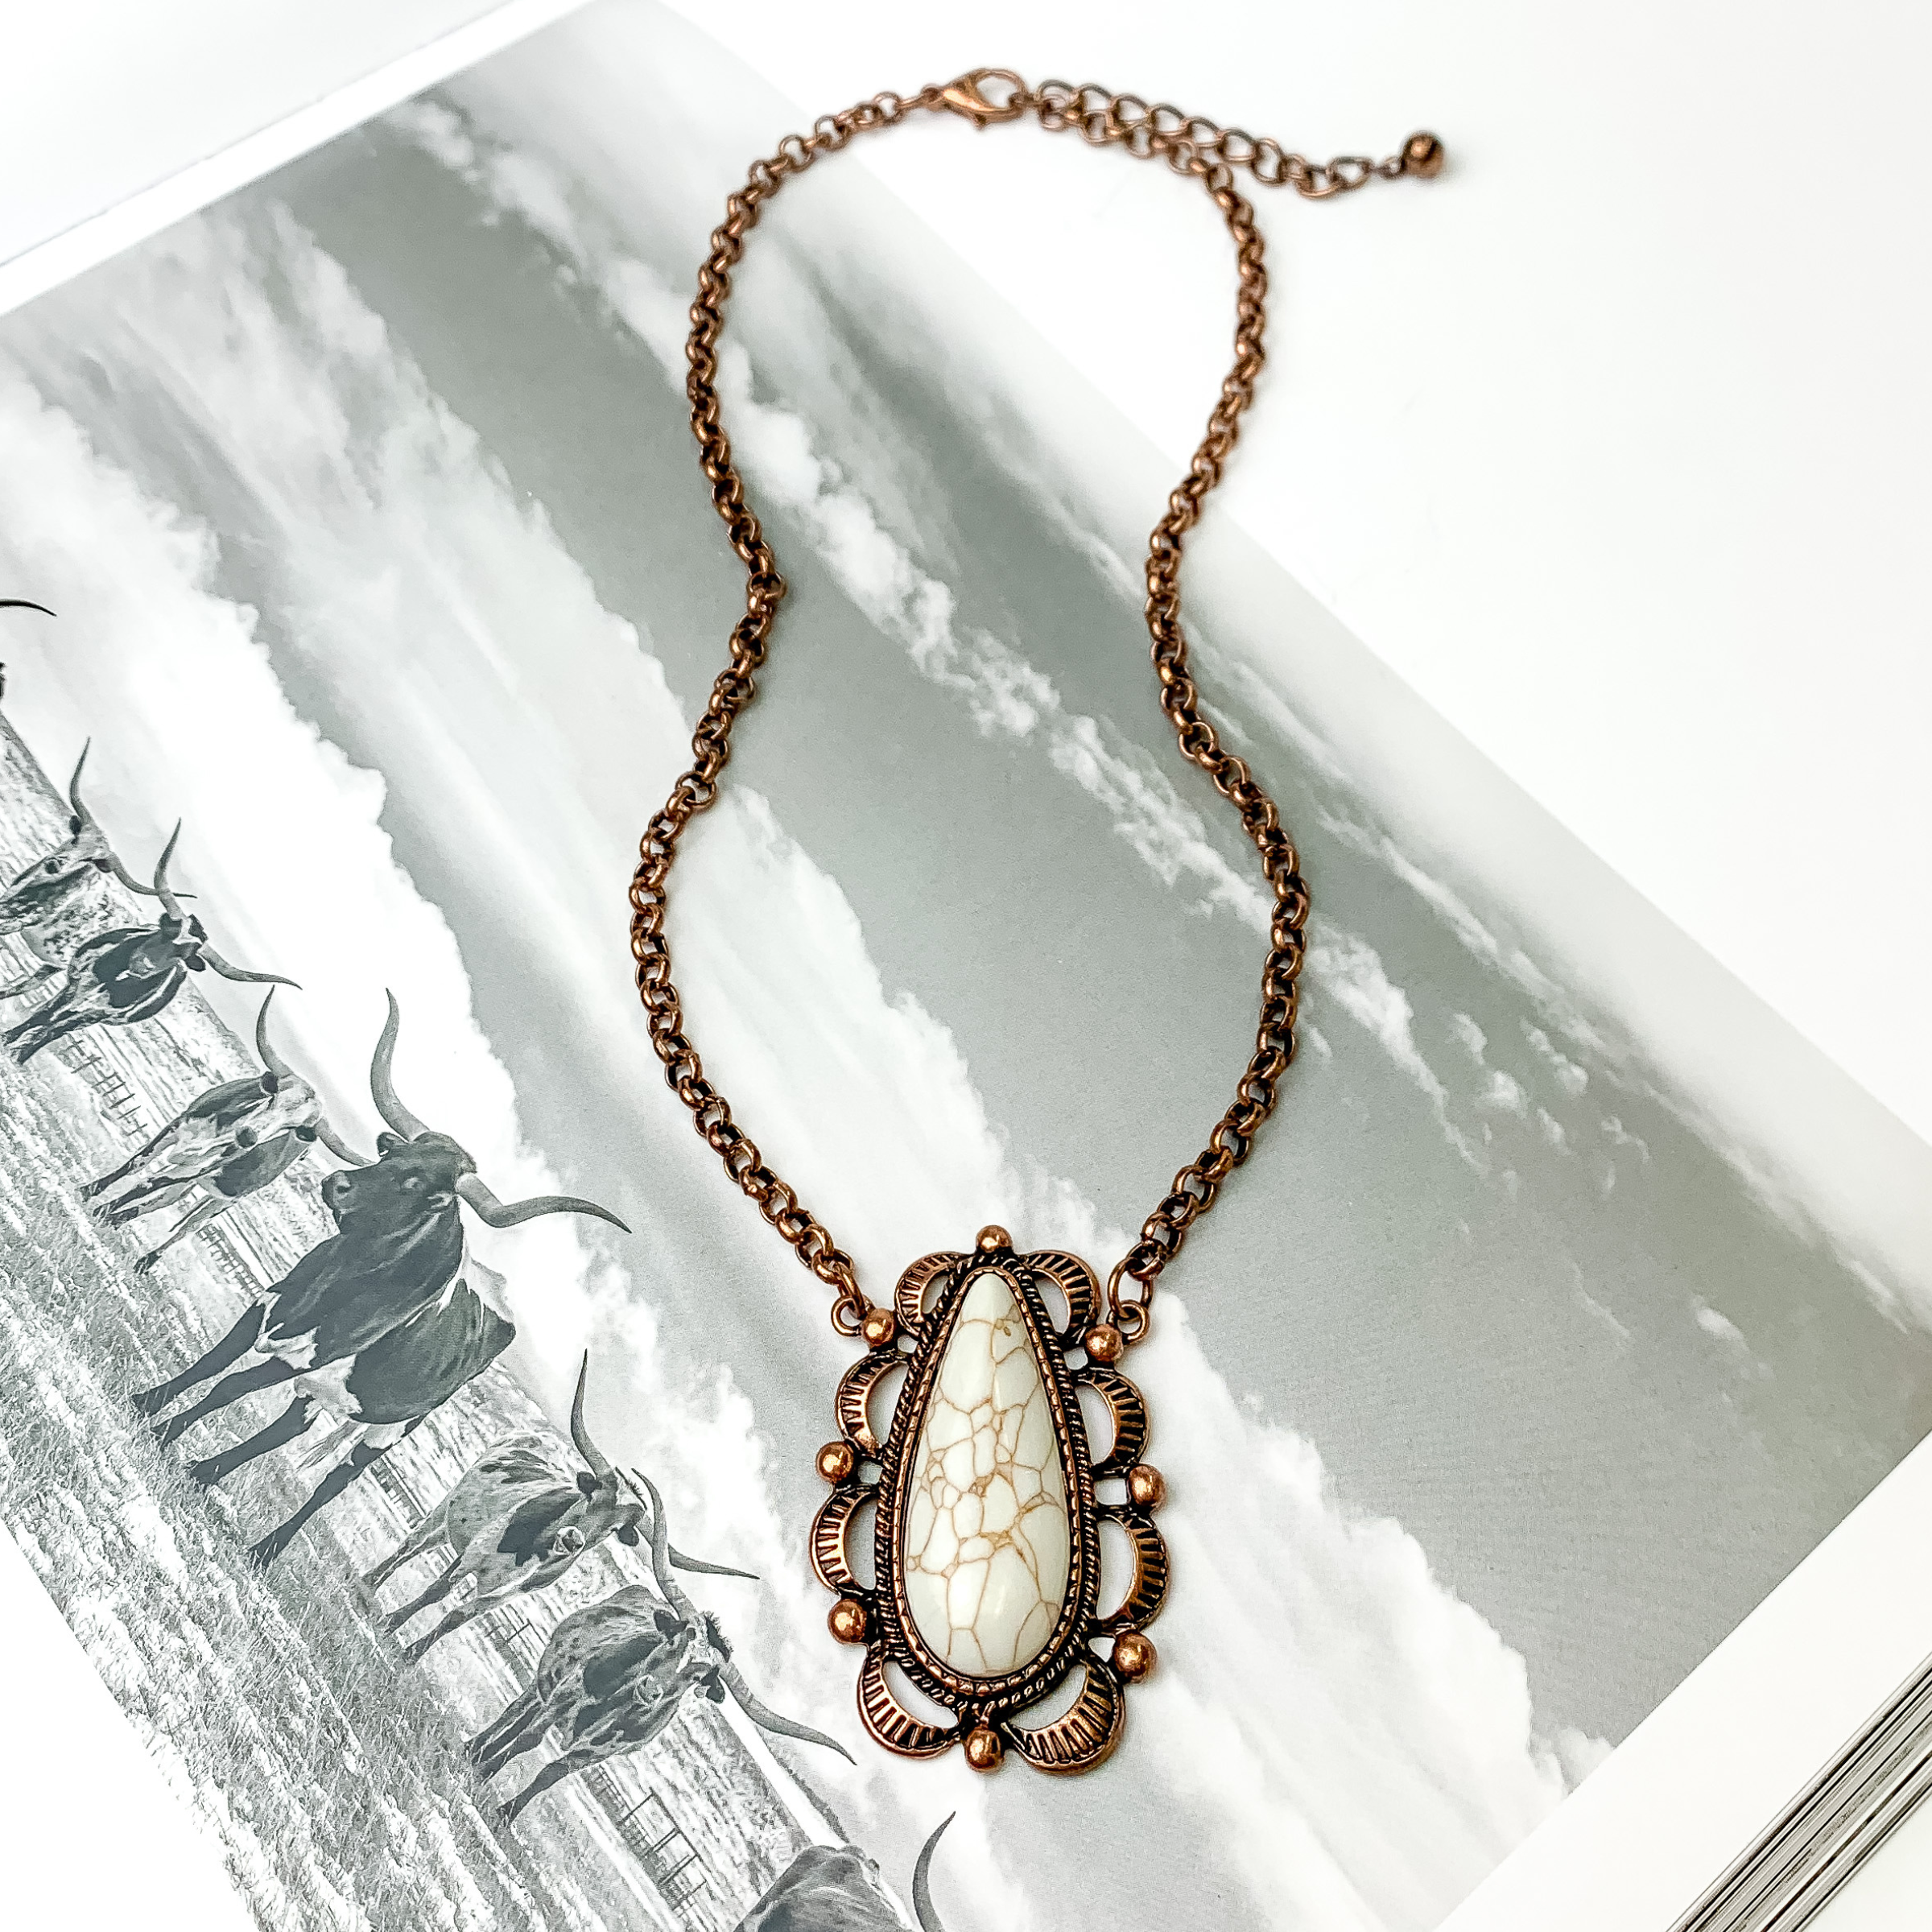 Copper chain necklace with ivory, teardrop stone. The stone also has a detailed copper outline. This necklace is pictured on an open black and white western picture book.